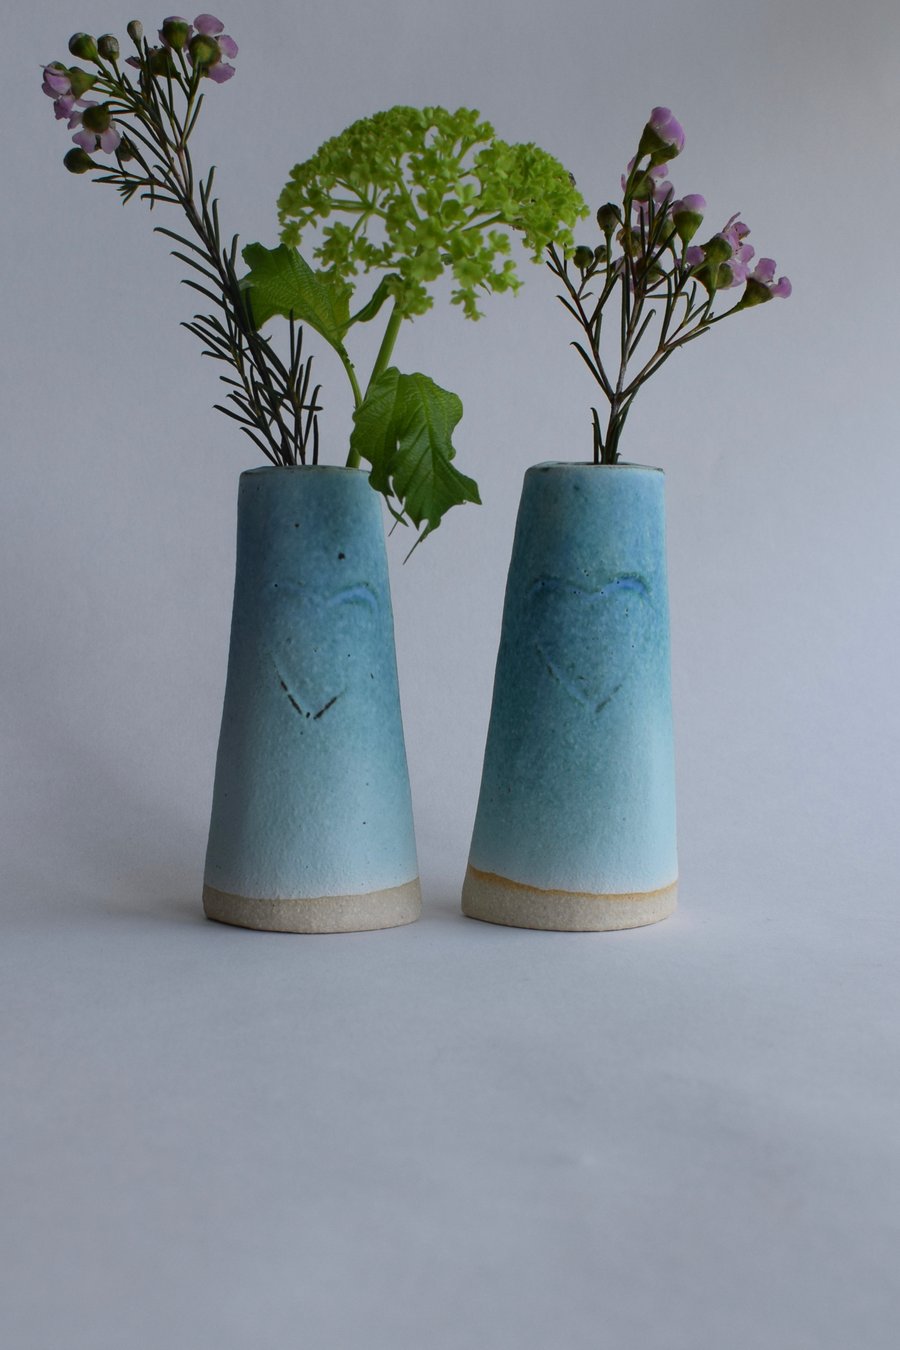 A Pair of Ceramic Heart Vases for Flowers